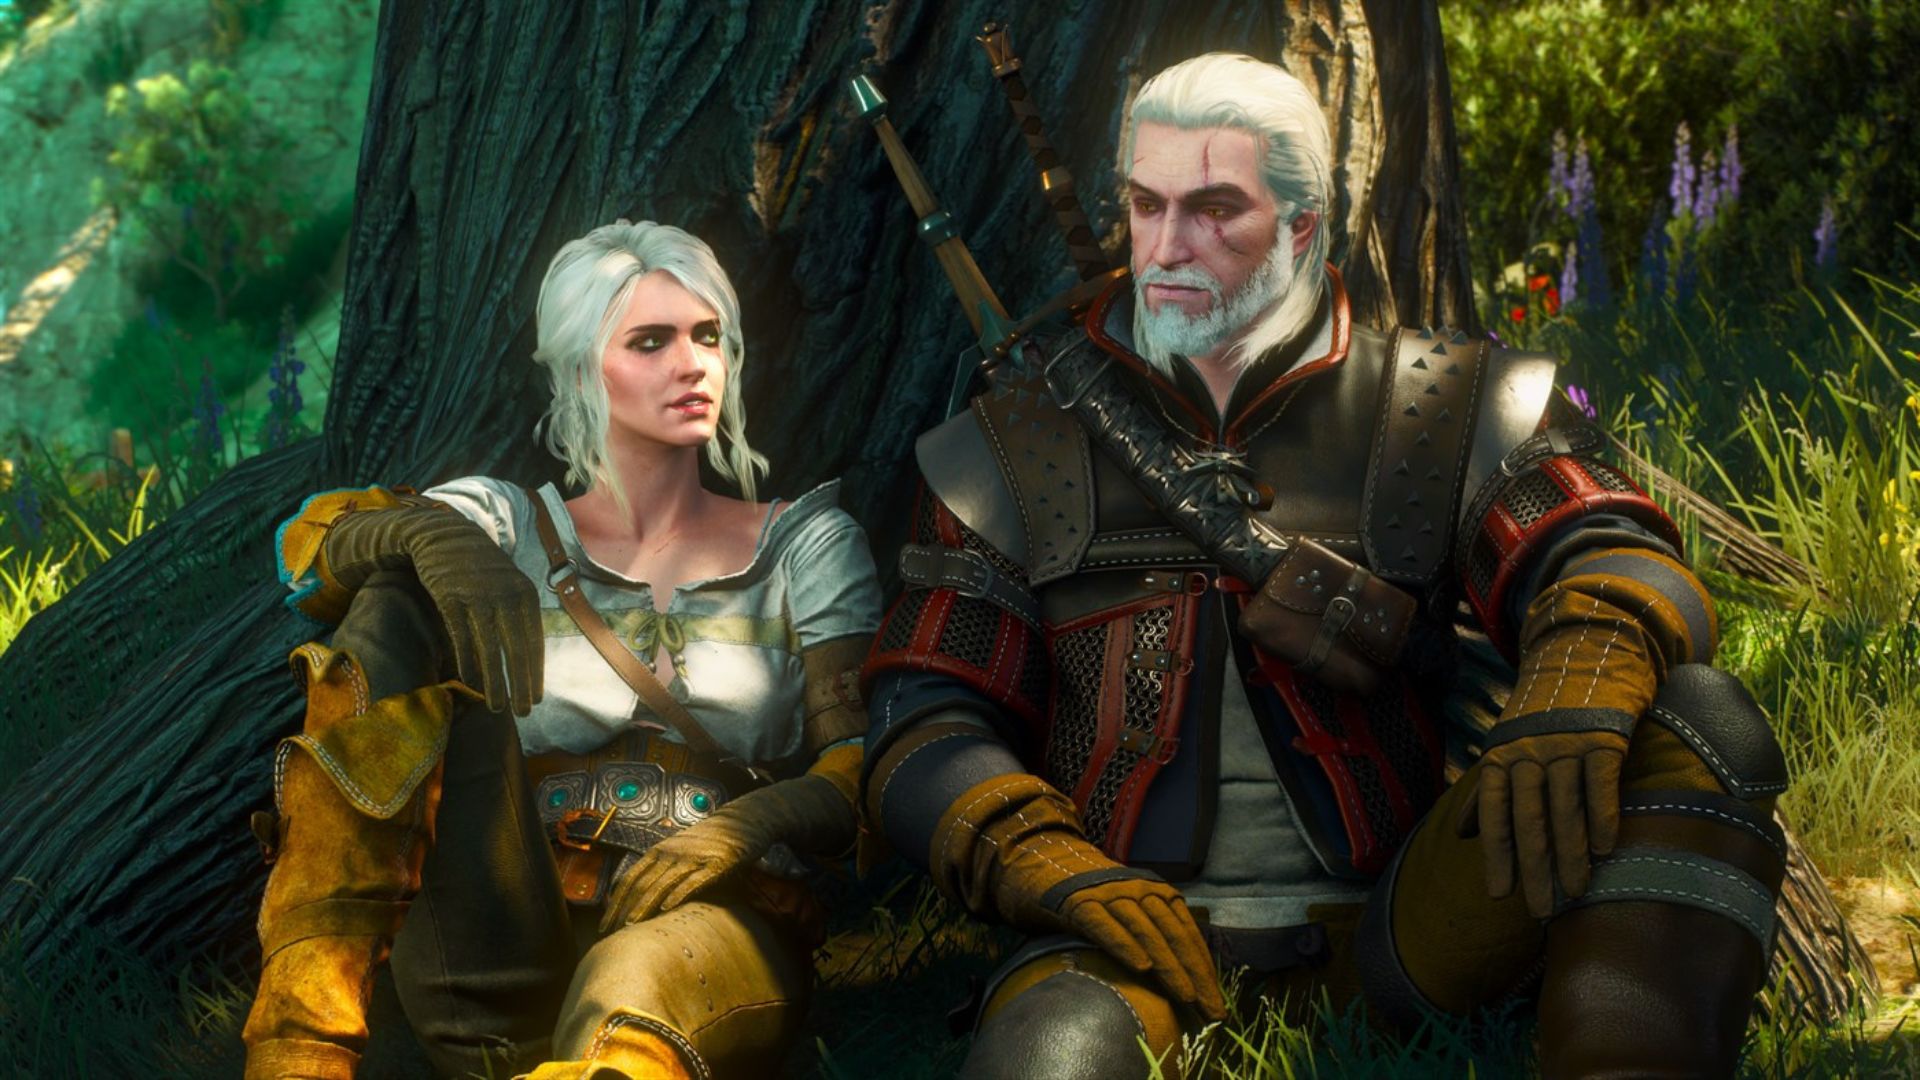 There's no release date for The Witcher 3 update on Switch